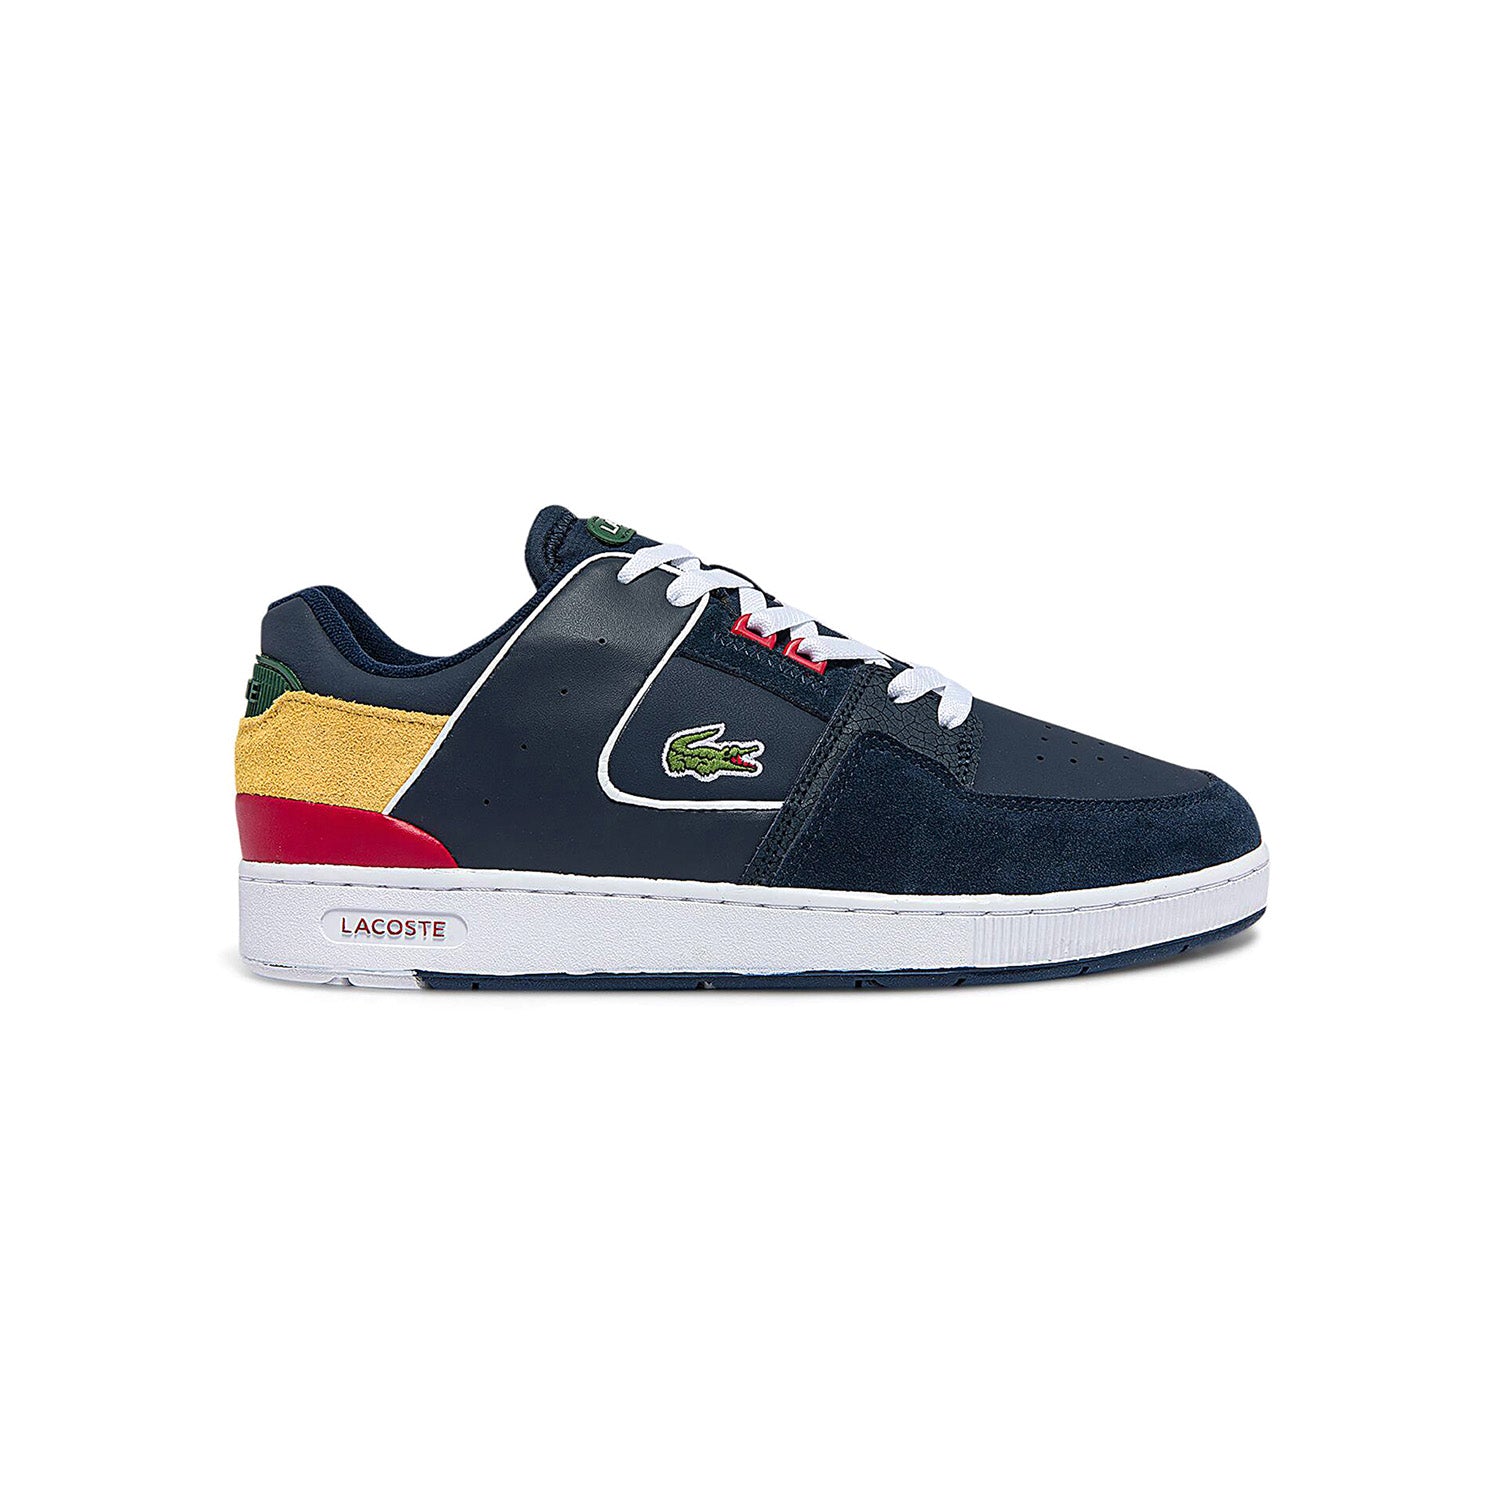 Urbanas Lacoste 743Sma00602M3 Court Cage Sma Nvy/Ylw – THN